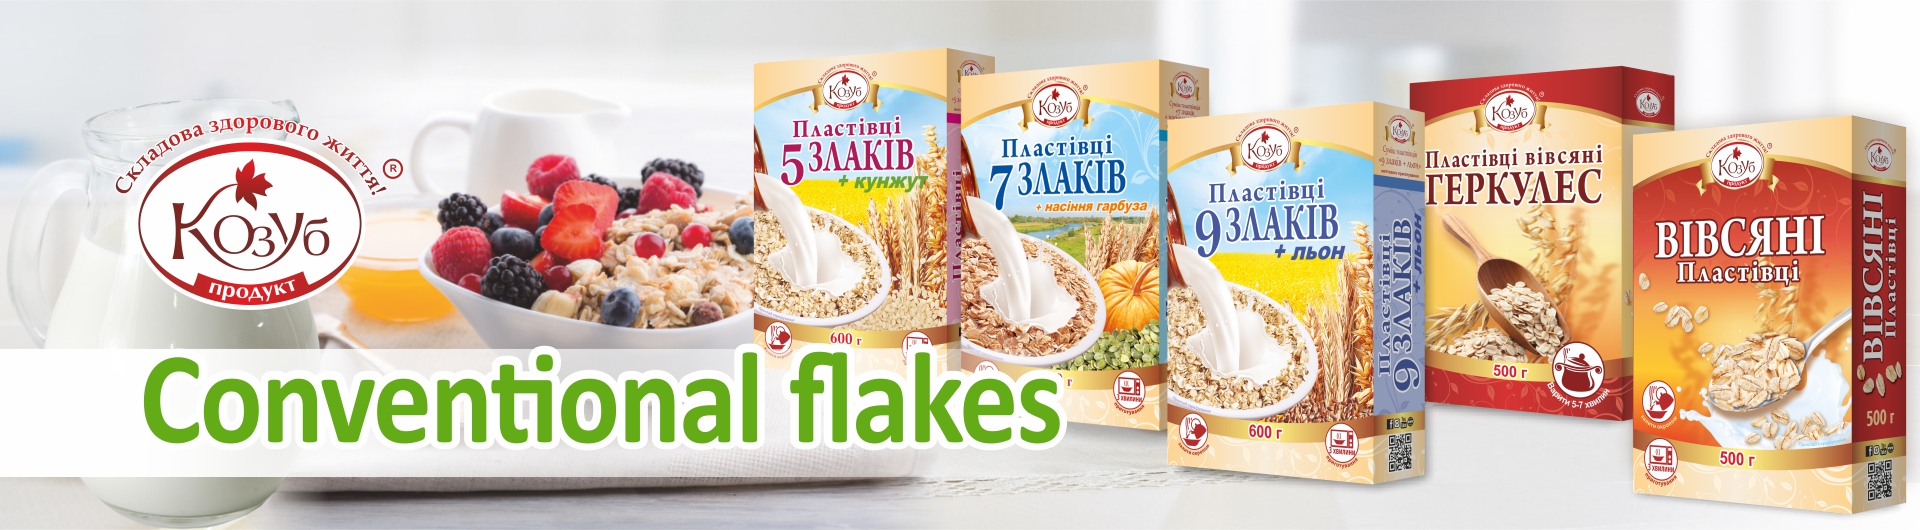 Conventional flakes1